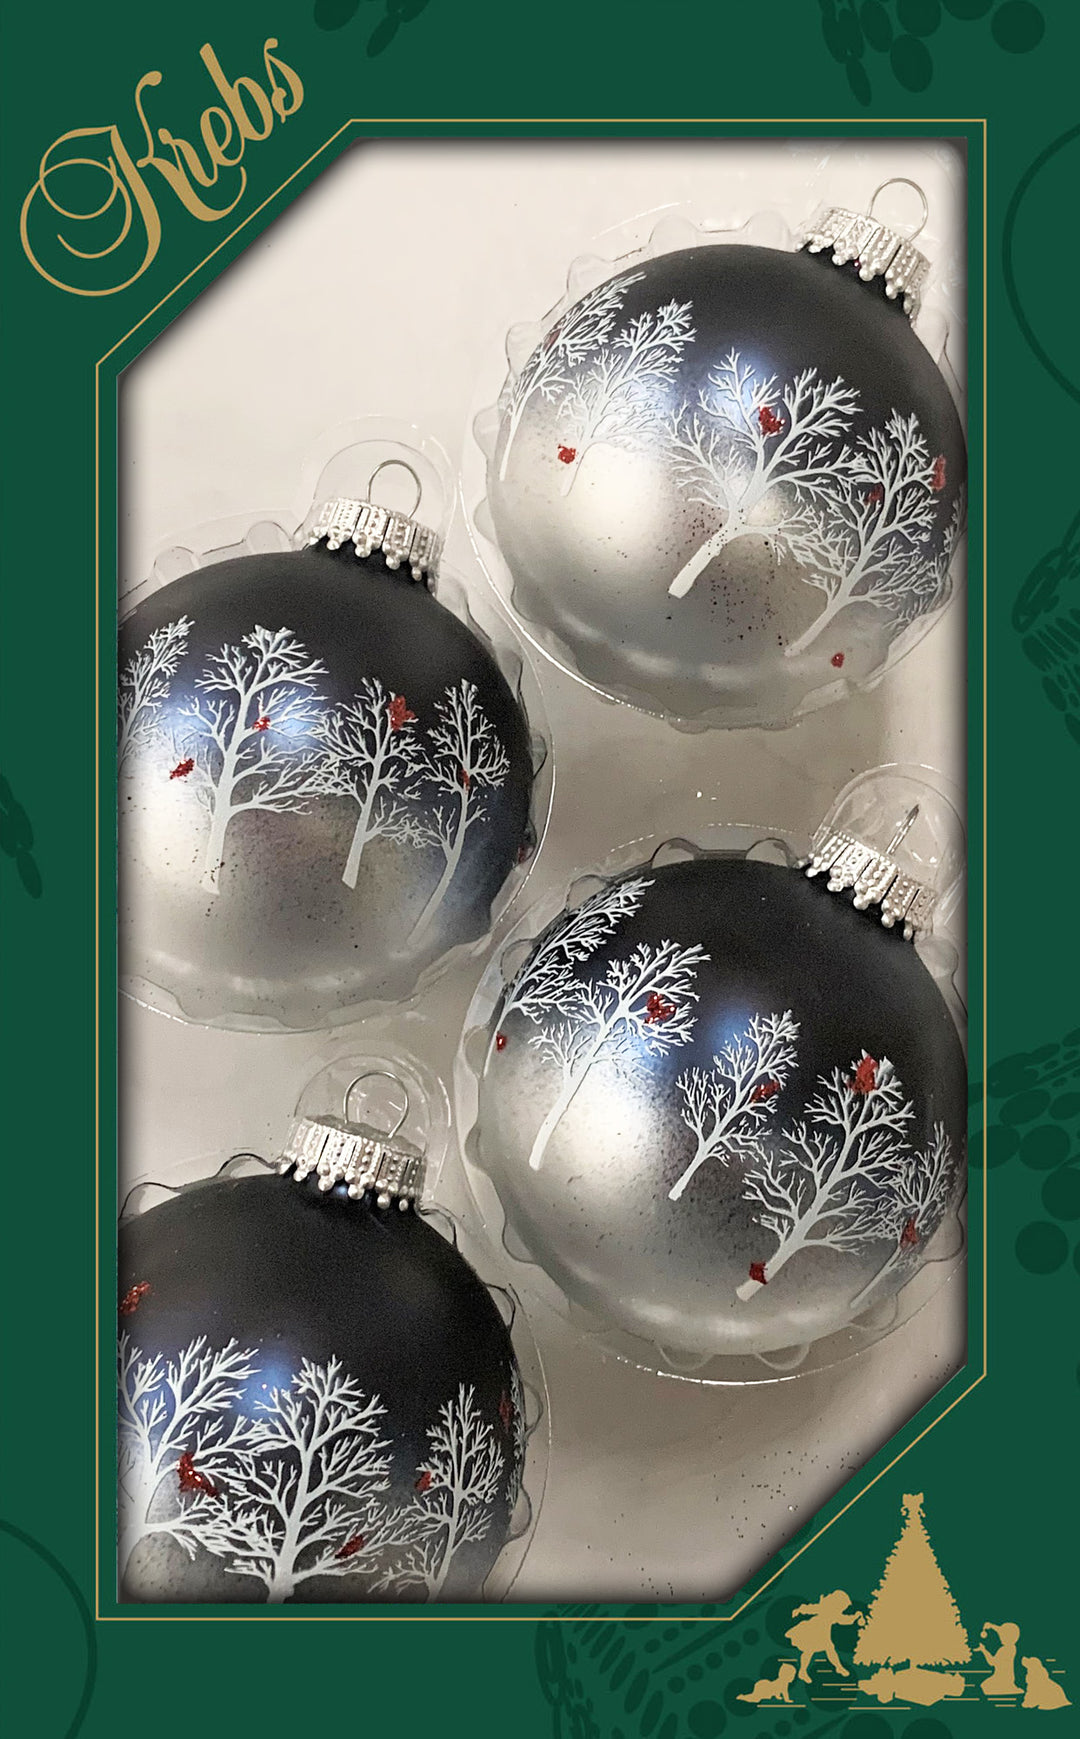 Glass Christmas Tree Ornaments - 67mm/2.63" [4 Pieces] Decorated Balls from Christmas by Krebs Seamless Hanging Holiday Decor (Midnight Haze & Silver w/ Trees & Cardinals)